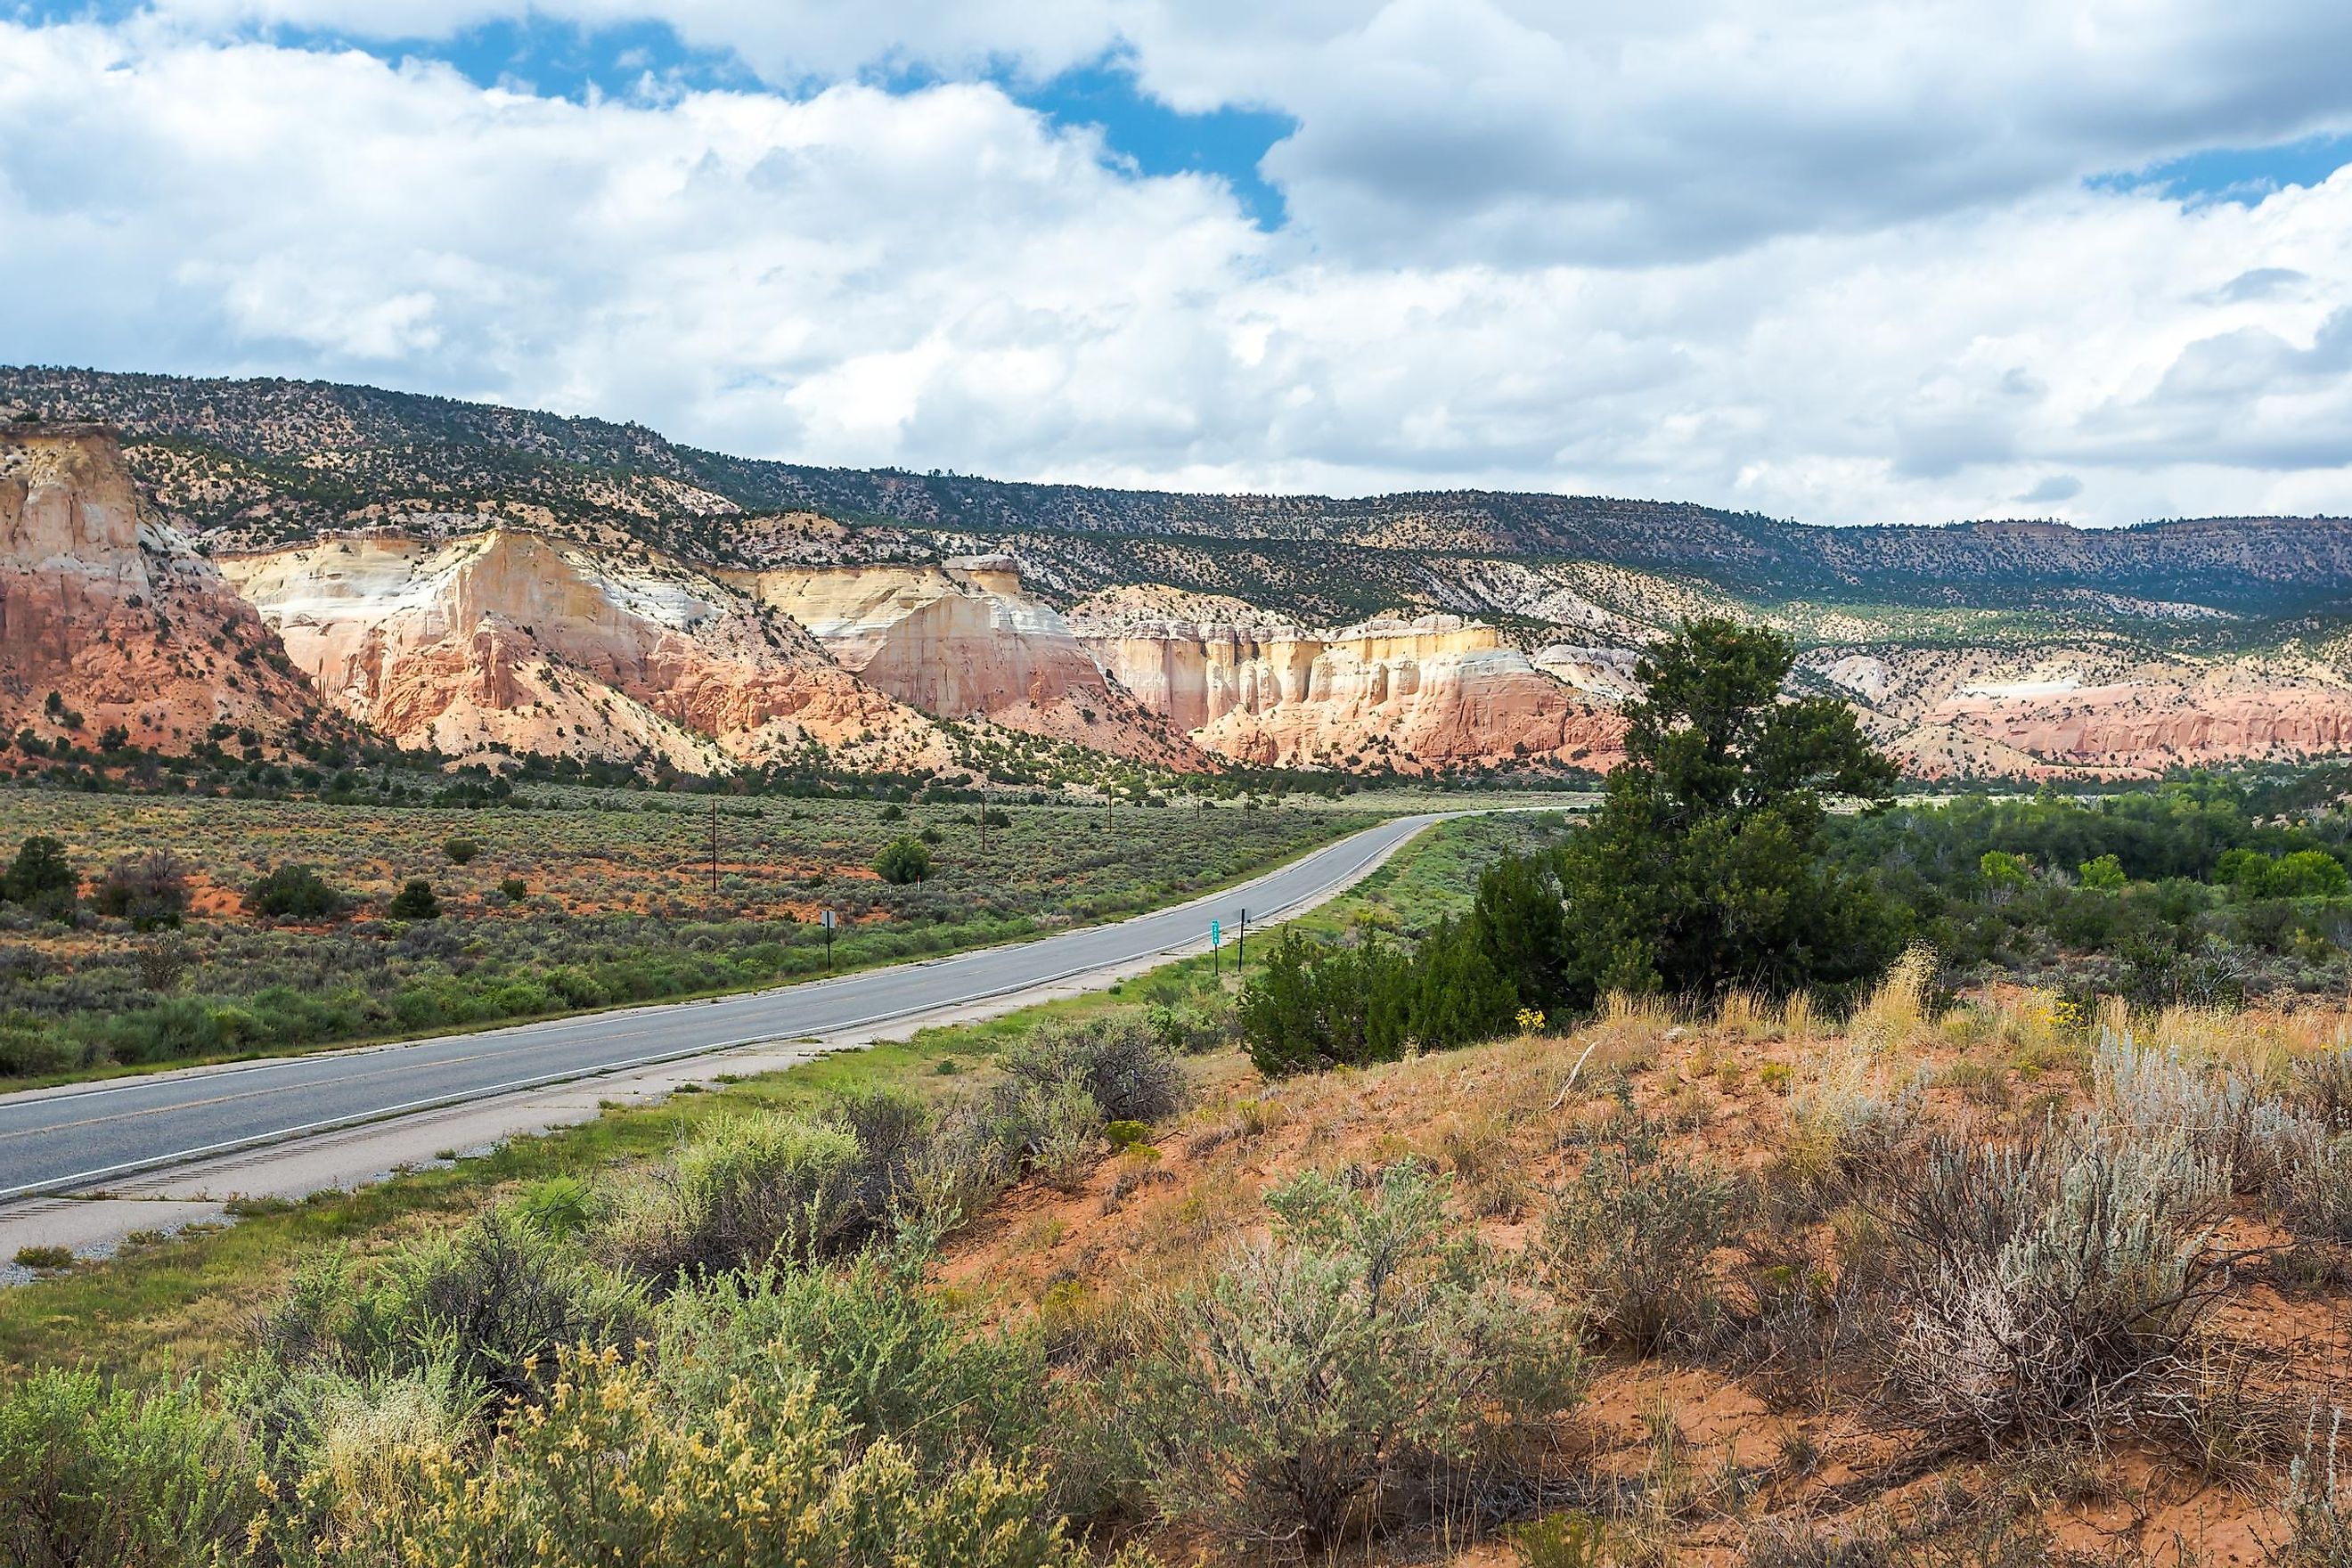 A road through New Mexico's wilderness.